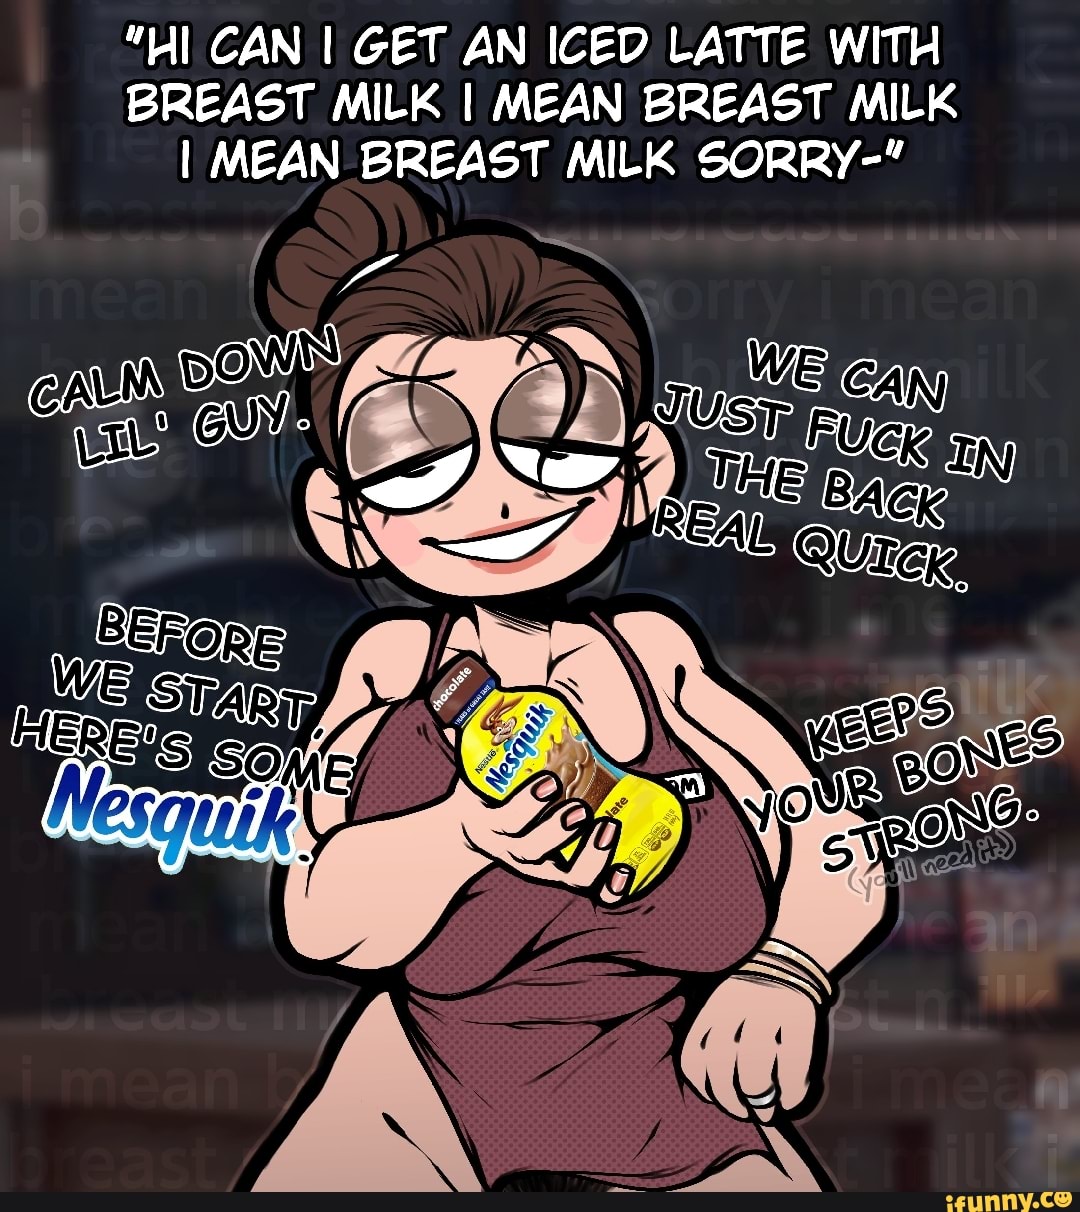 Iced latte with breast milk rule 34